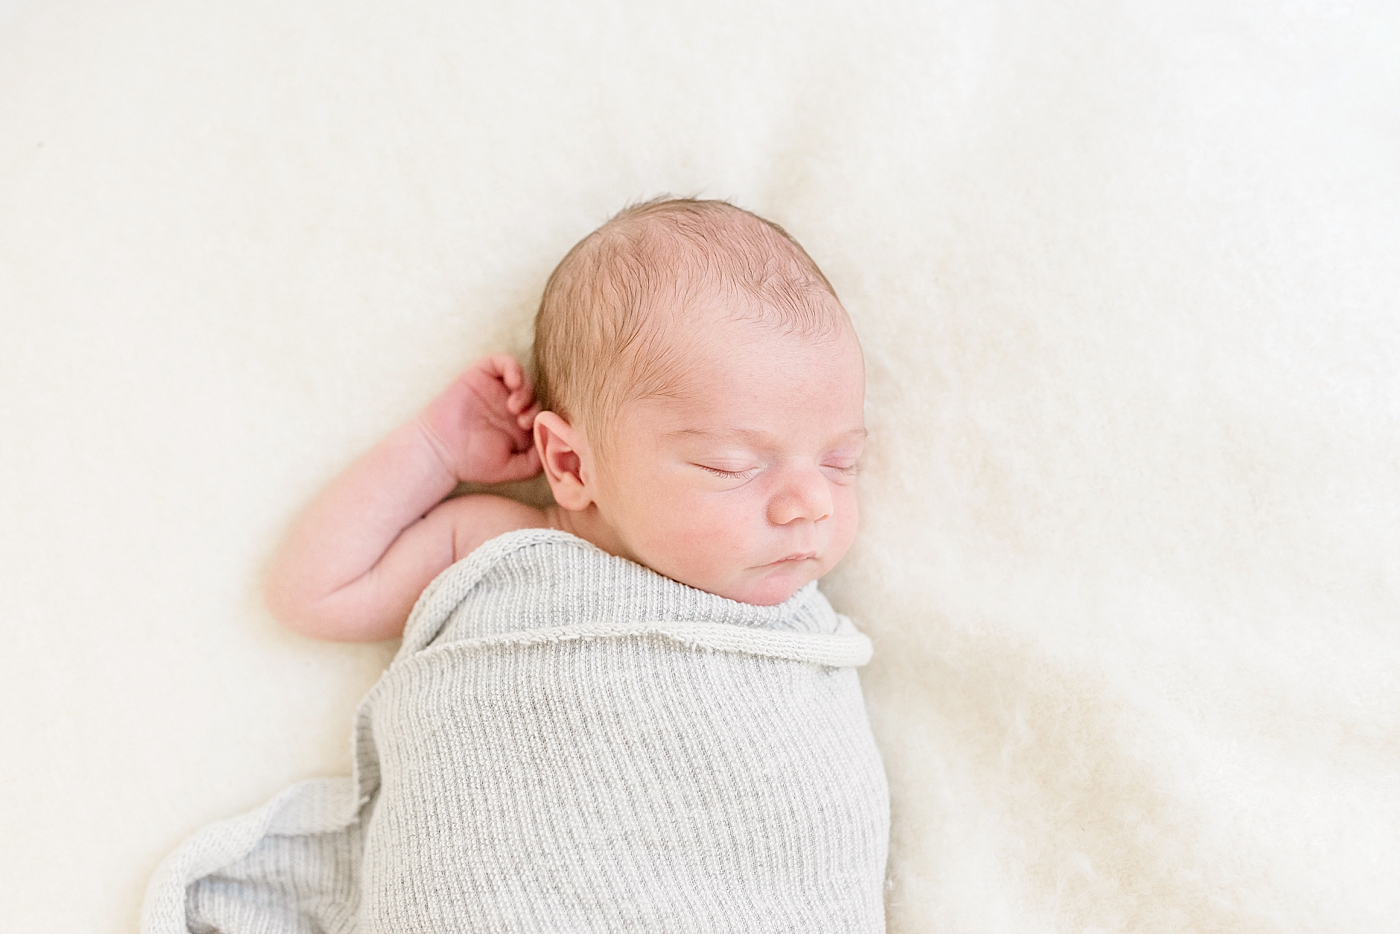 Newborn baby boy wrapped in a gray swaddle | Photo by Anna Wisjo Photography